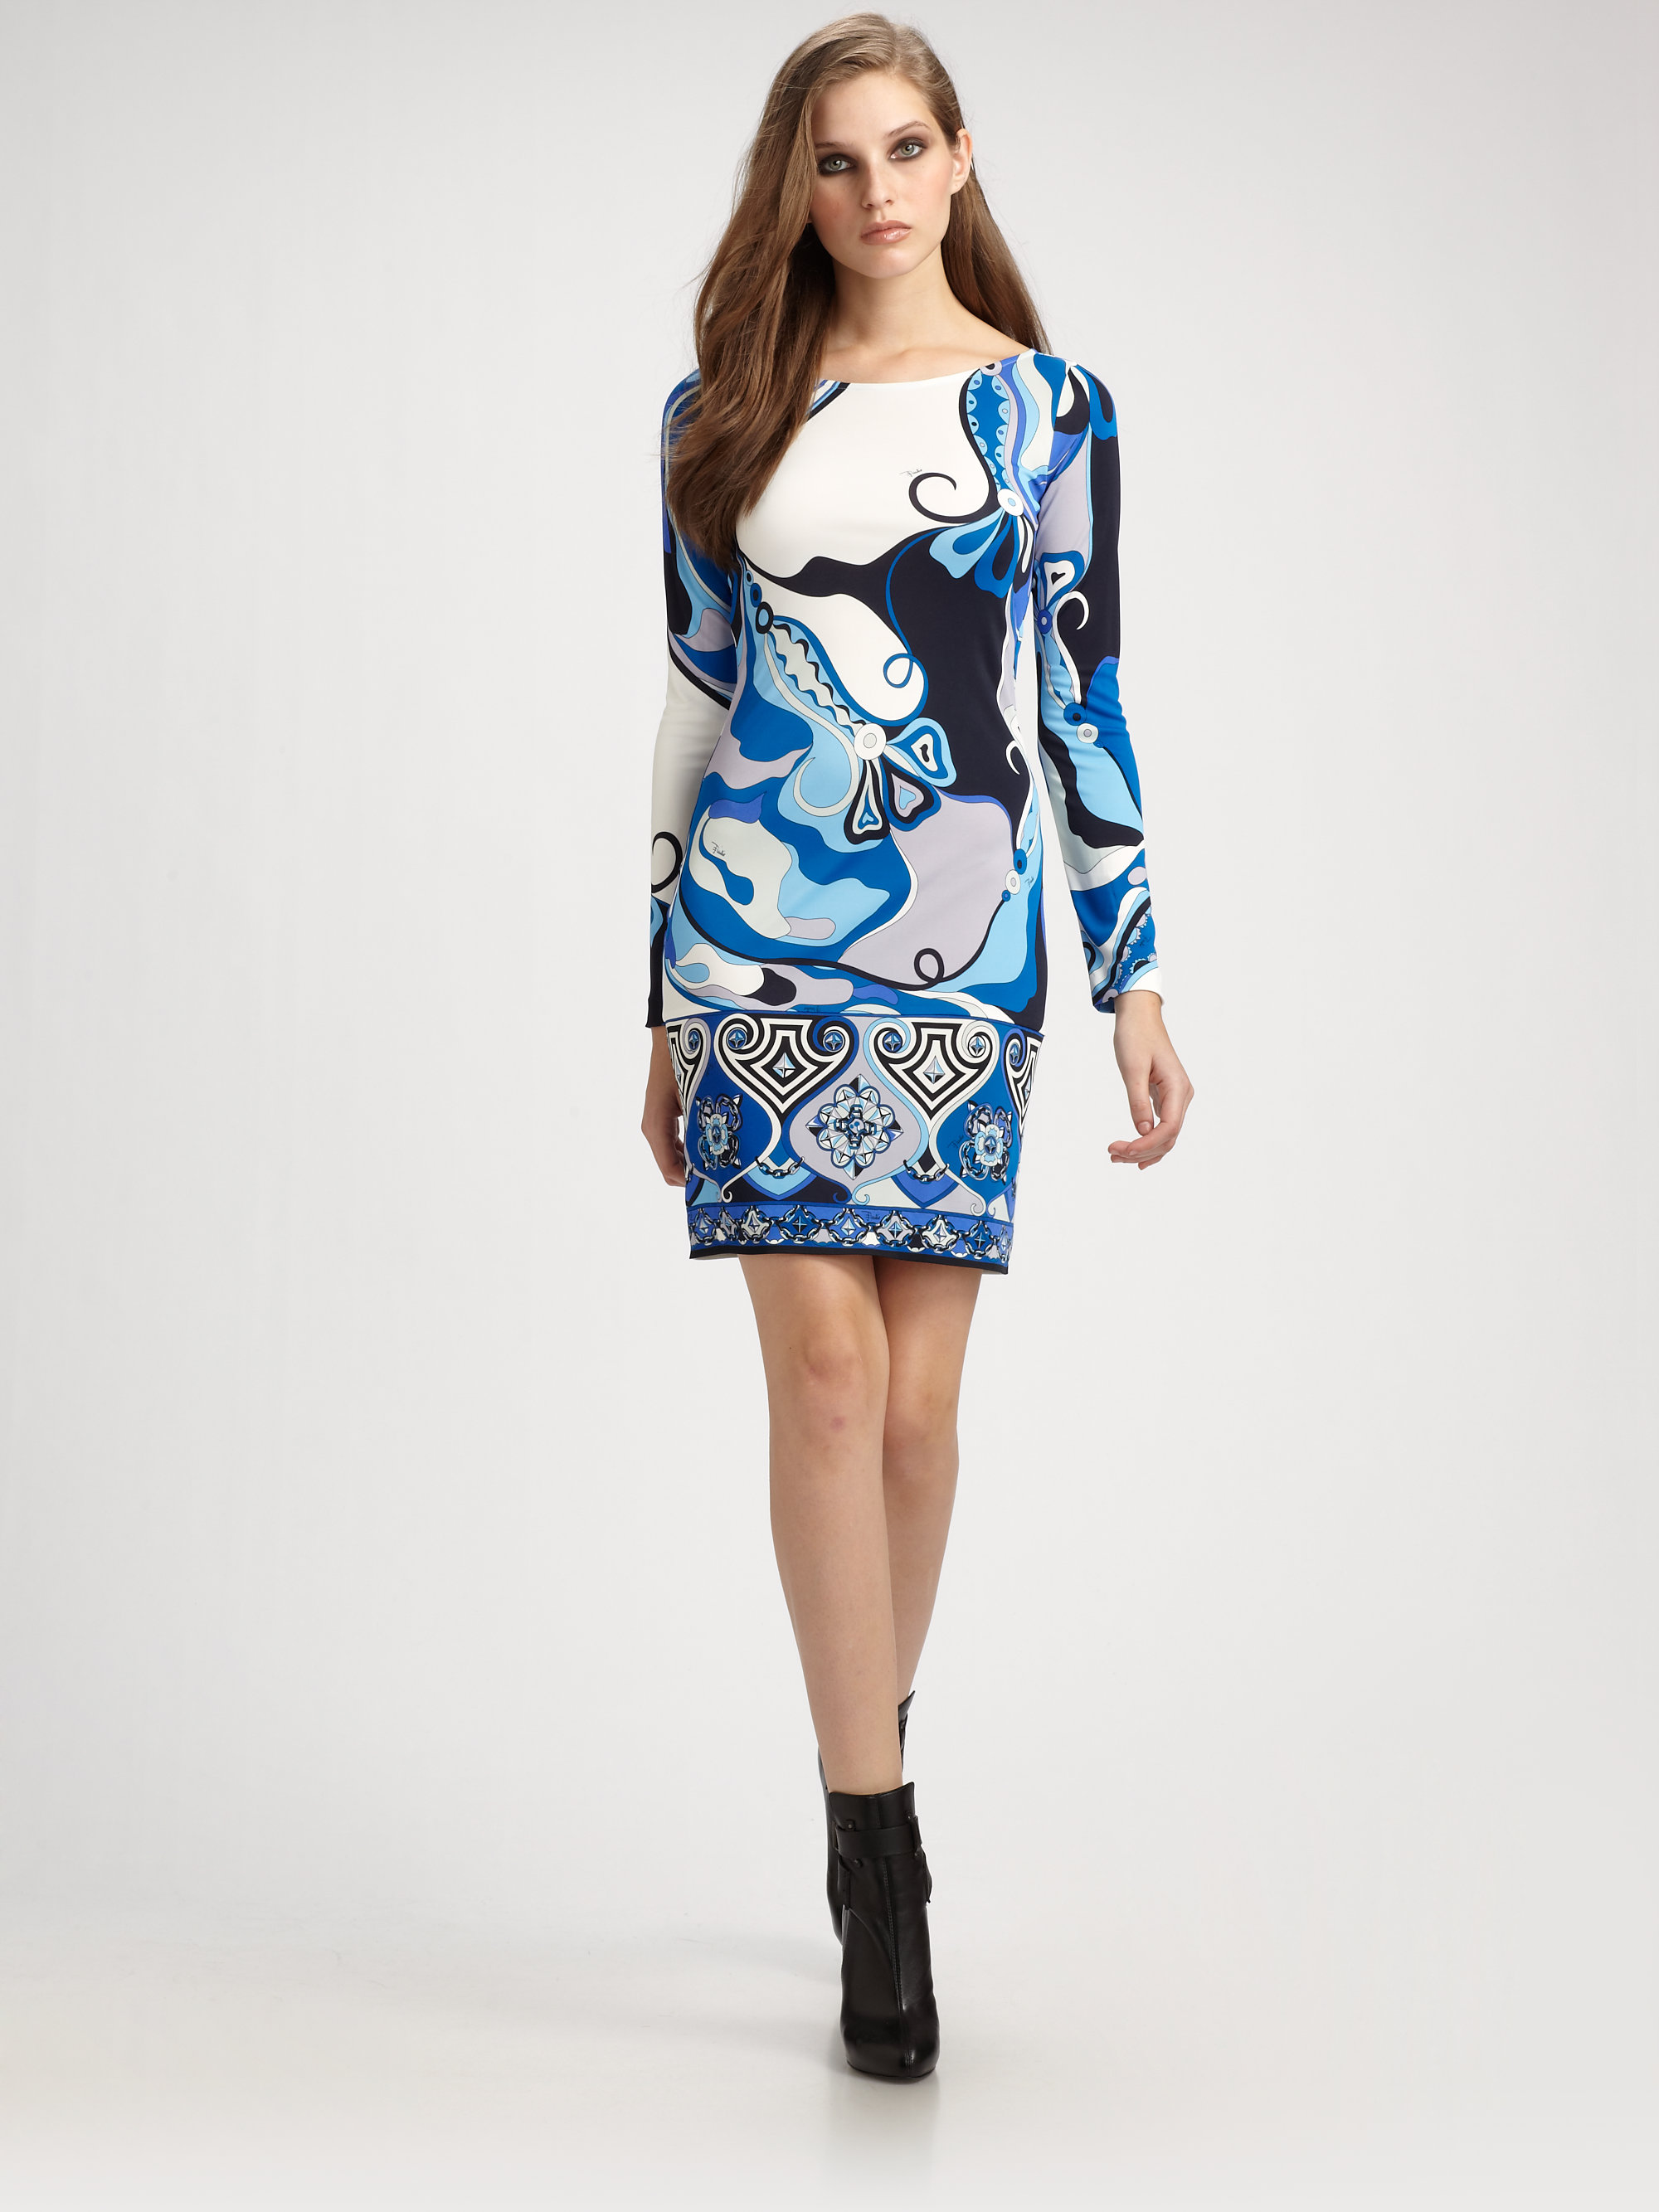 Lyst - Emilio Pucci Orchidee Print Boatneck Dress in Blue